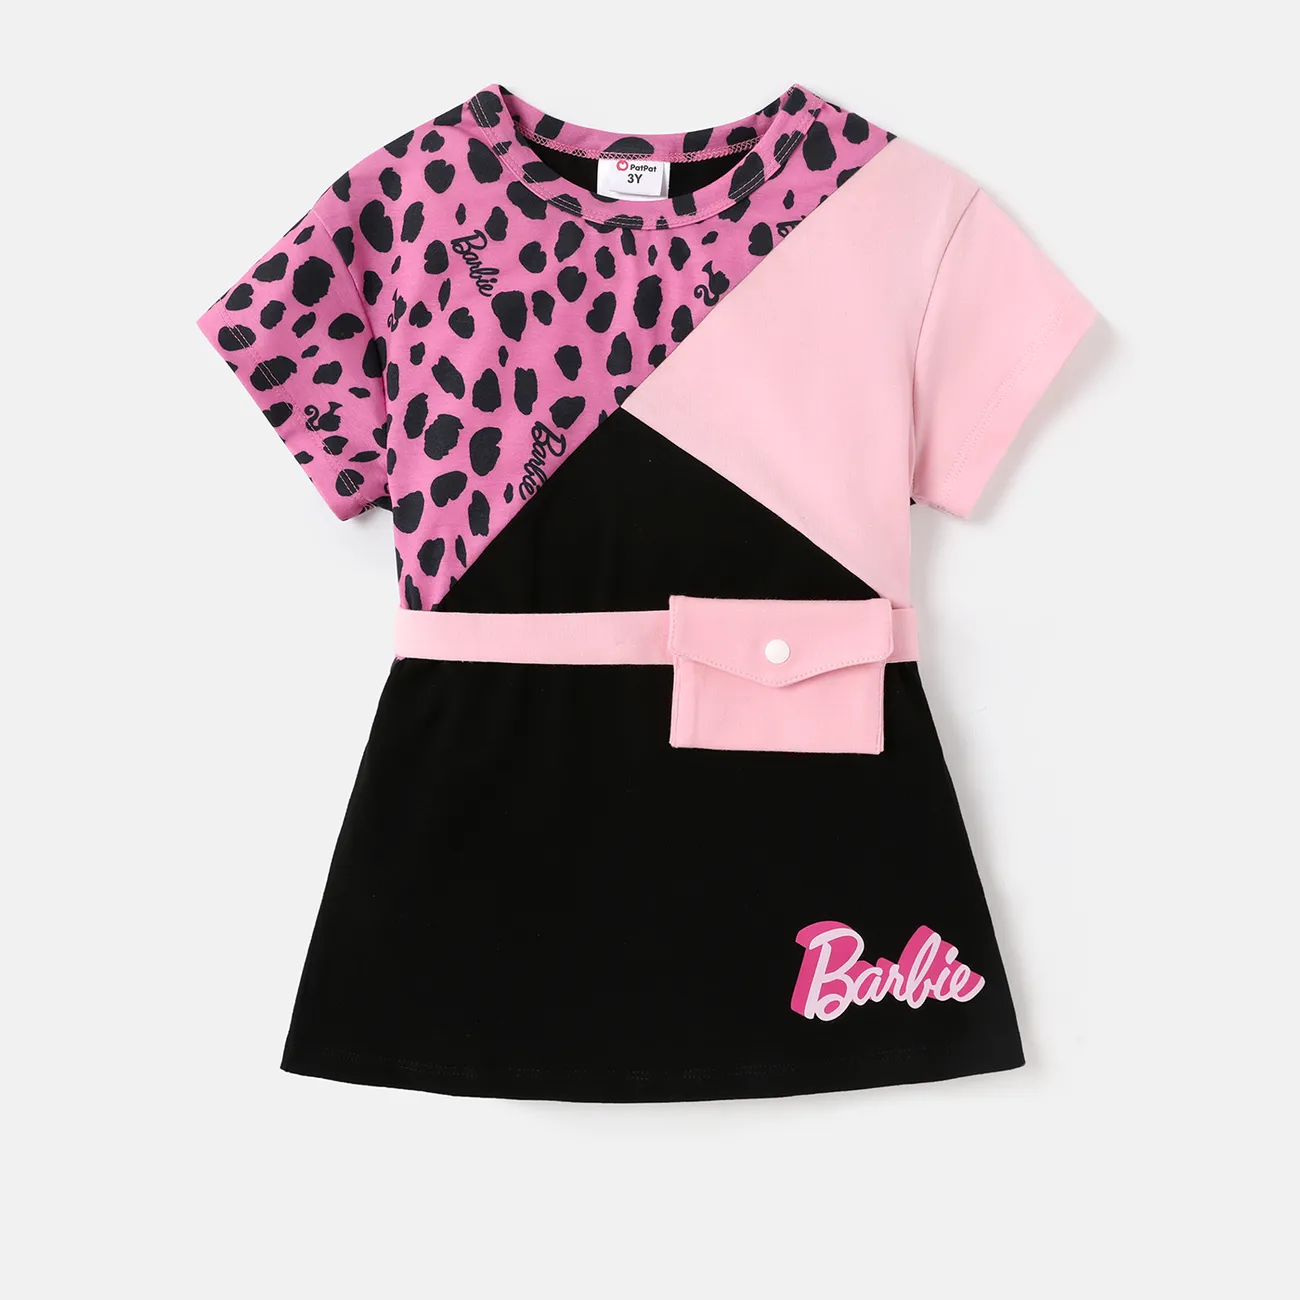 Barbie Toddler/Kid Girl Leopard/Colorblock Print Naia™ Short-sleeve Dress with Fanny Pack ColorBlock big image 1